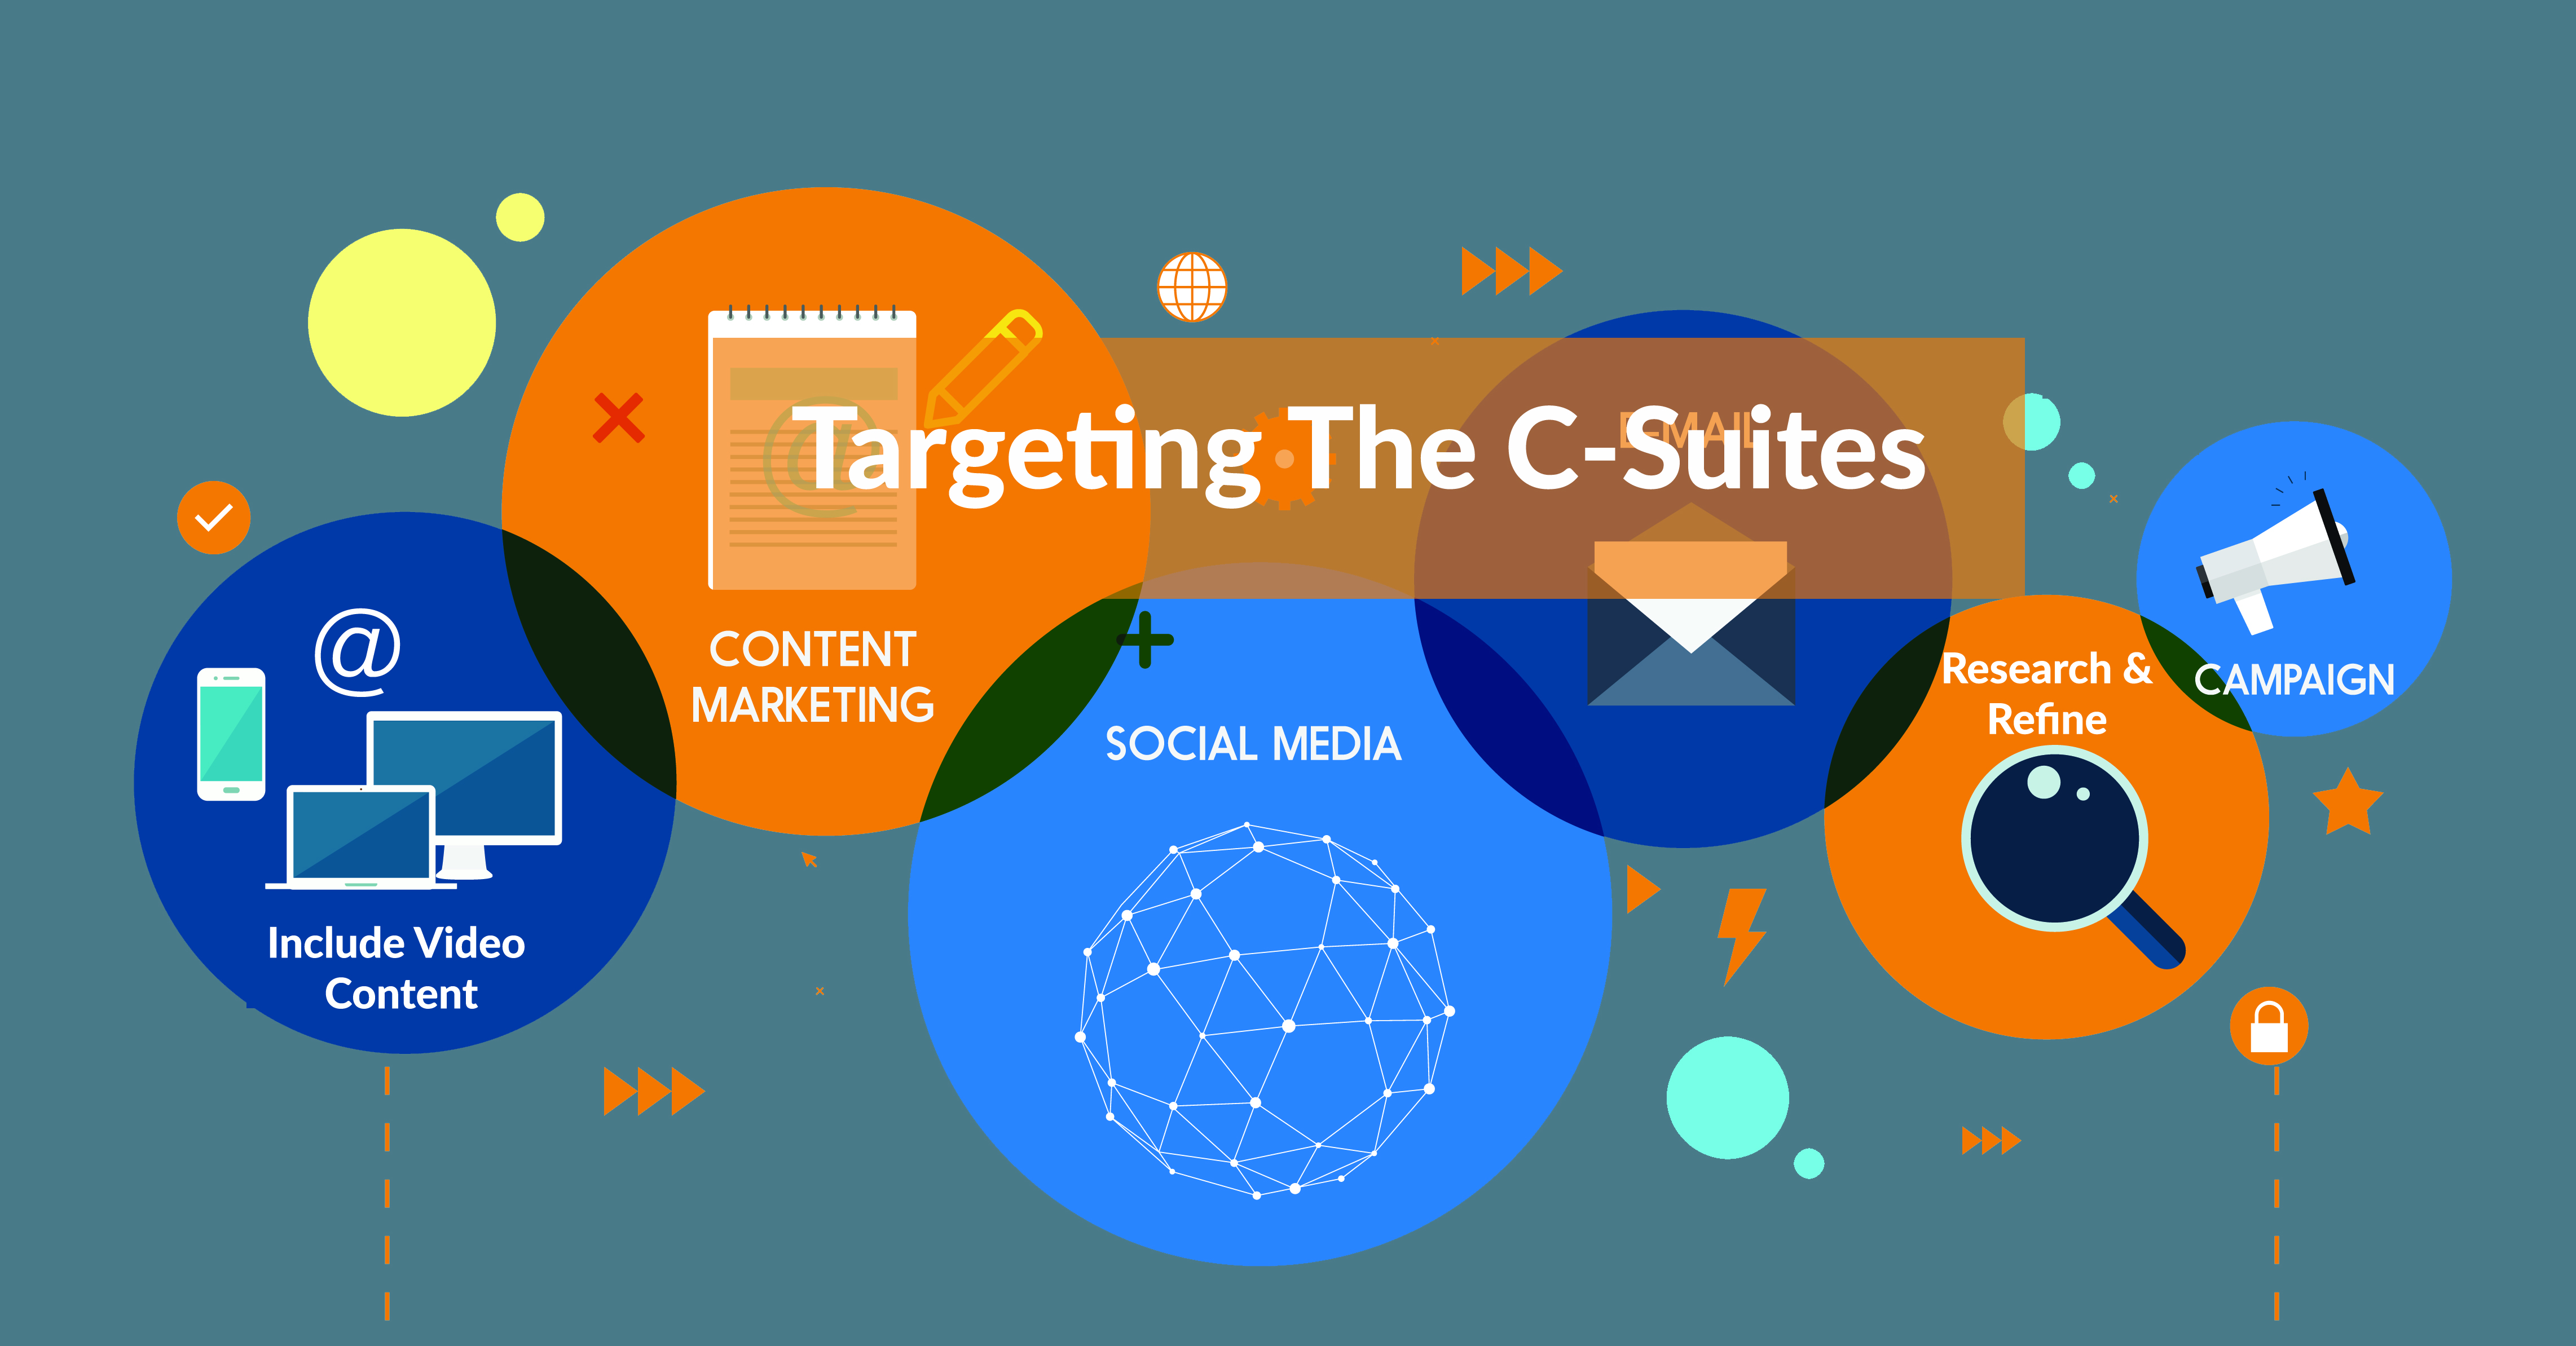 Targeting the C-Suite: How to Market your Content Effectively!